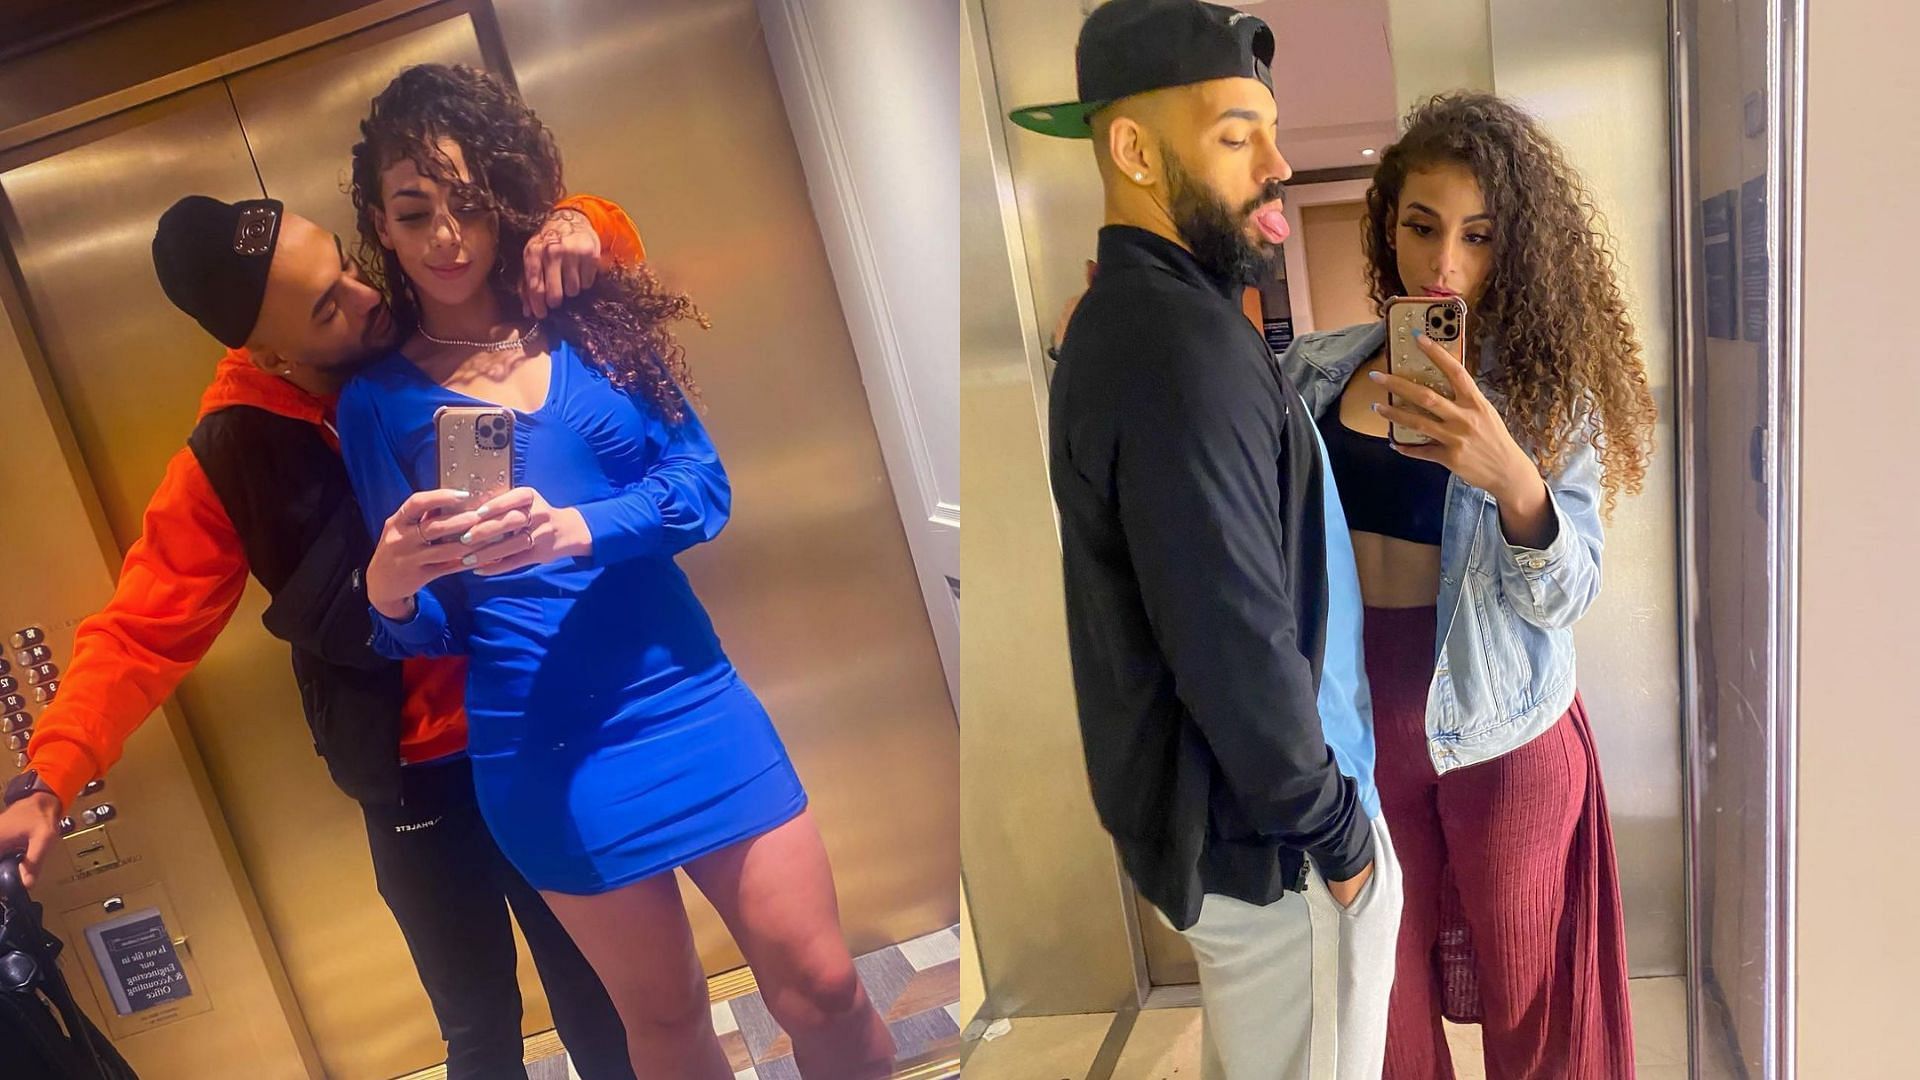 Samantha Irvin and Ricochet have been happily dating for quite a few months now